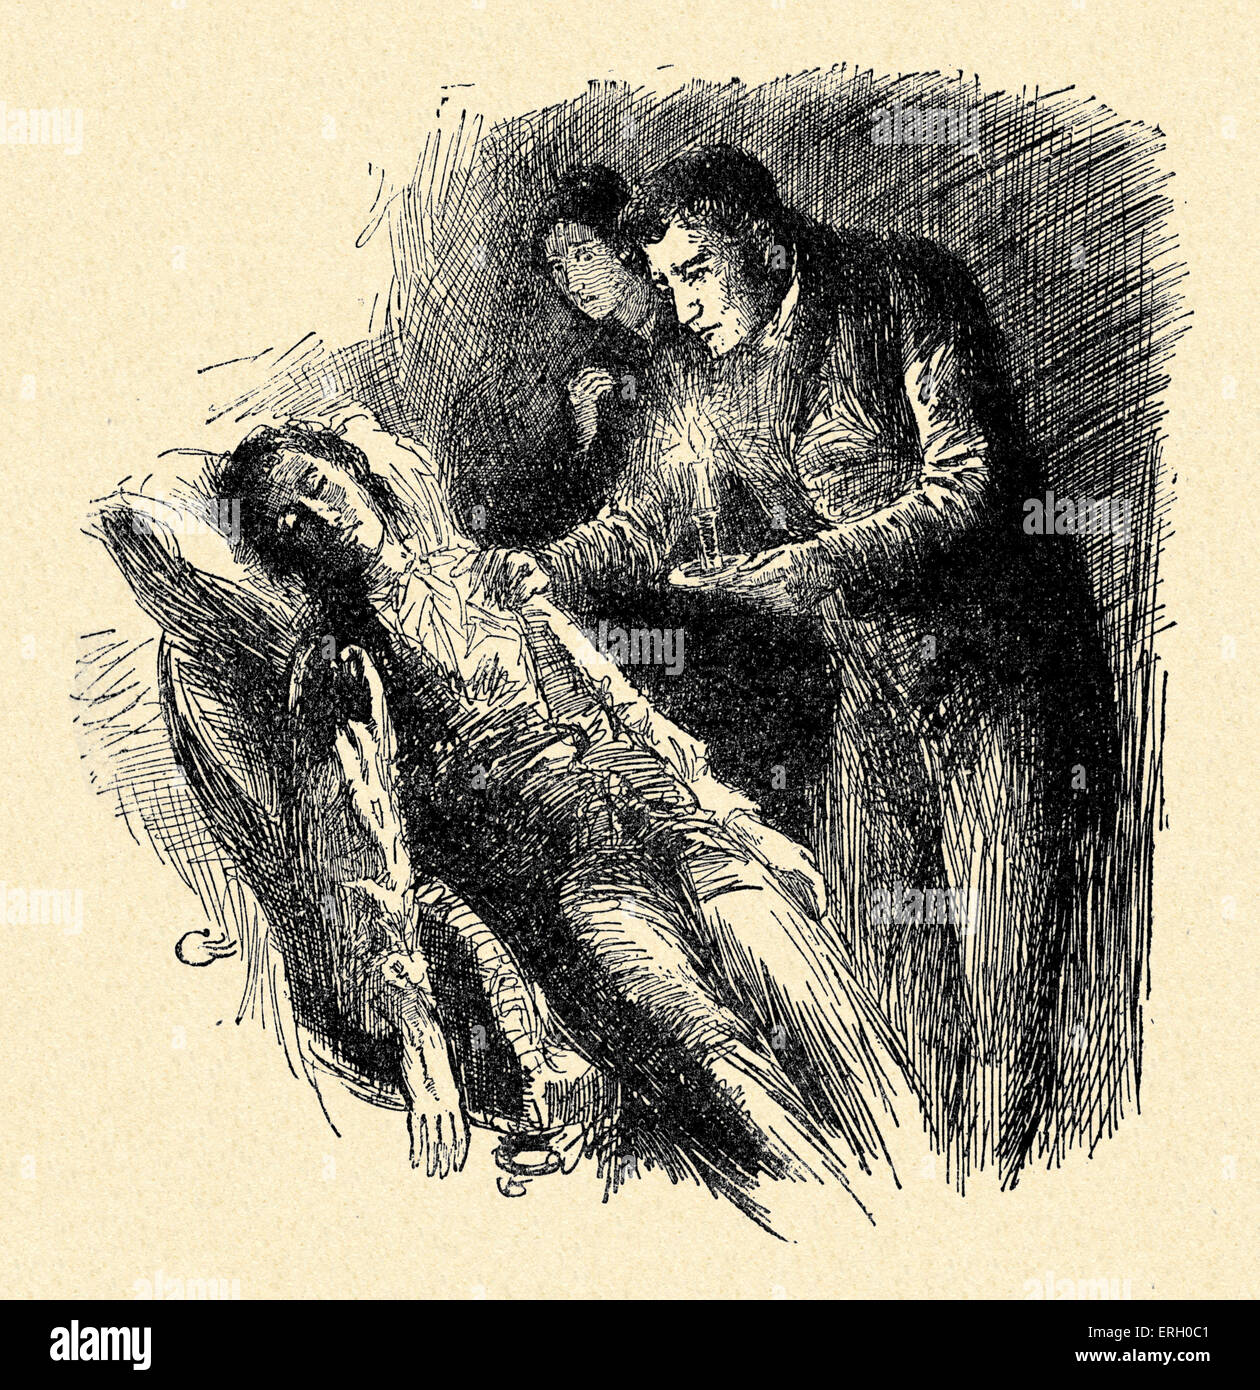 Jane Eyre by Charlotte Brontë. Caption reads: 'Mr Rochester held the candle over him' (Mason lying dying while Mr Rochester and Stock Photo